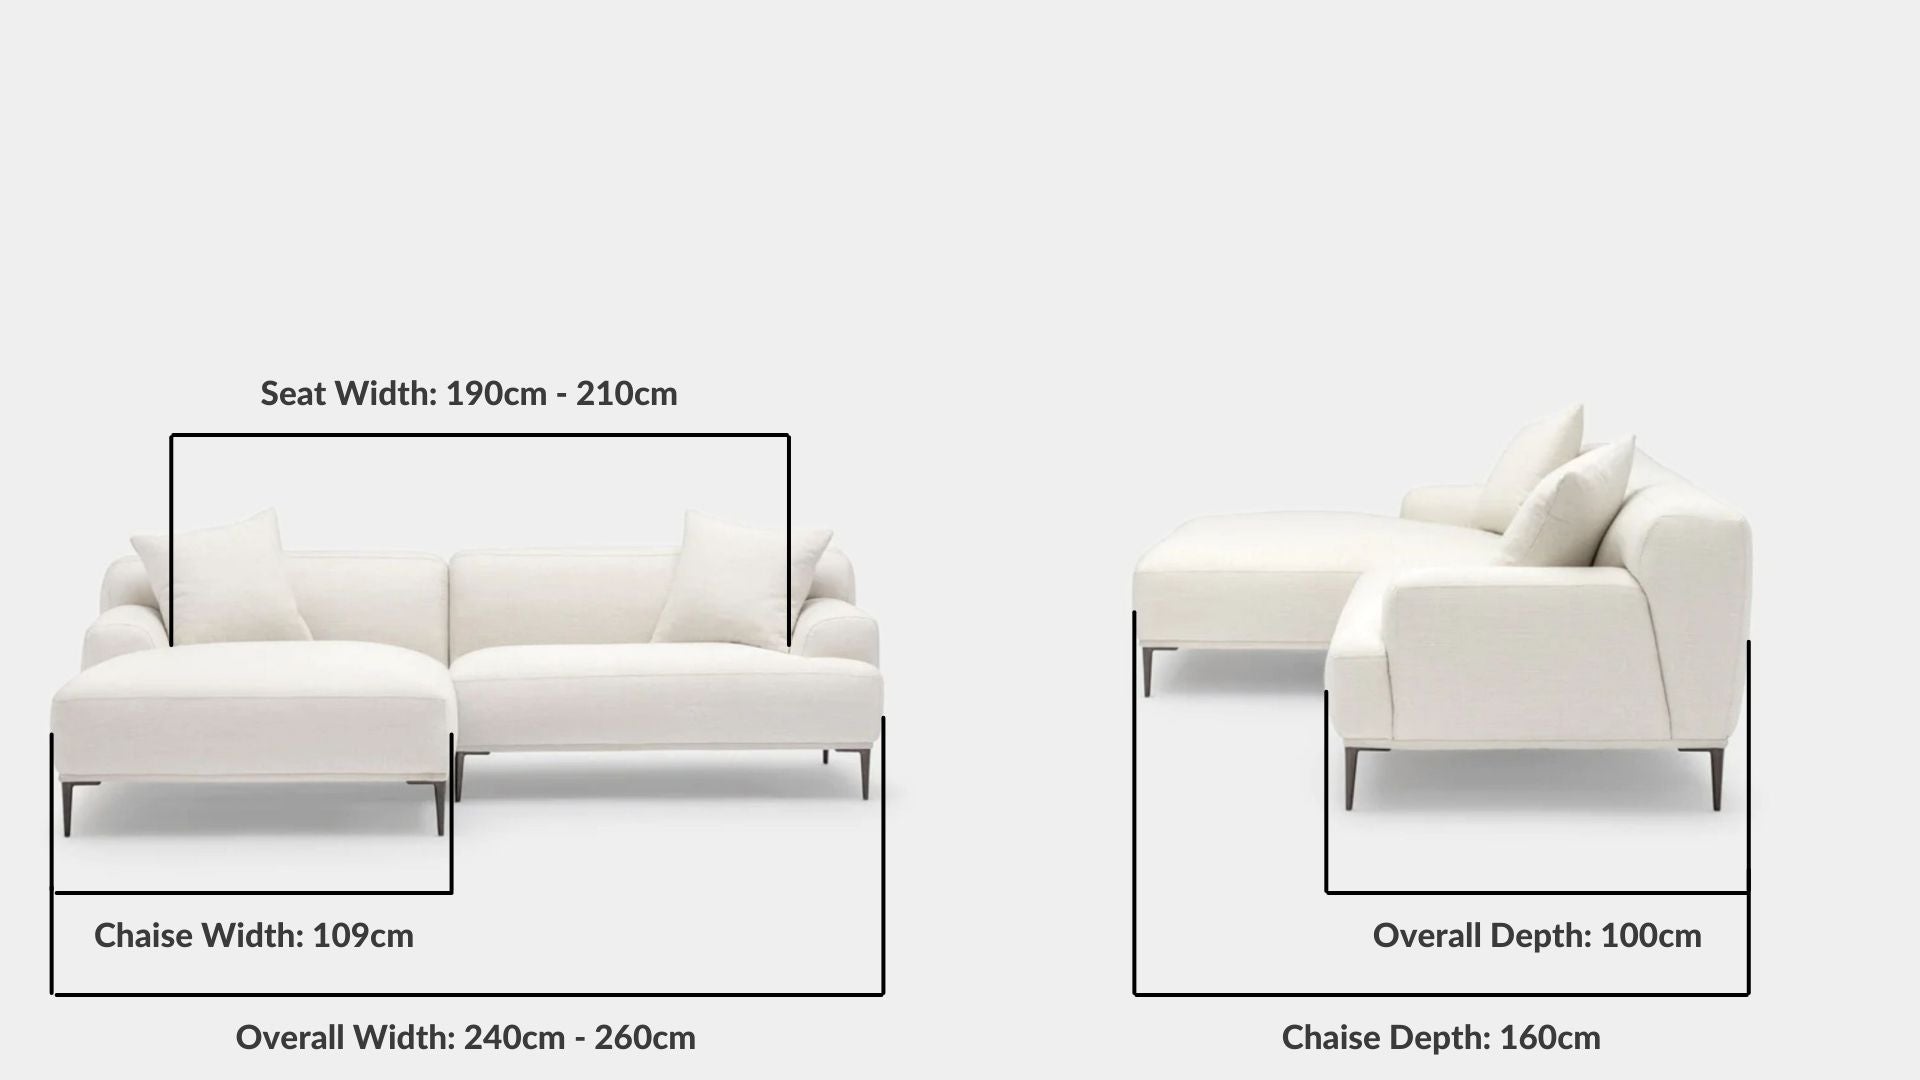 Details the key dimensions in terms of overall width, overall depth and seat width for Crystal Fabric Sectional Sofa